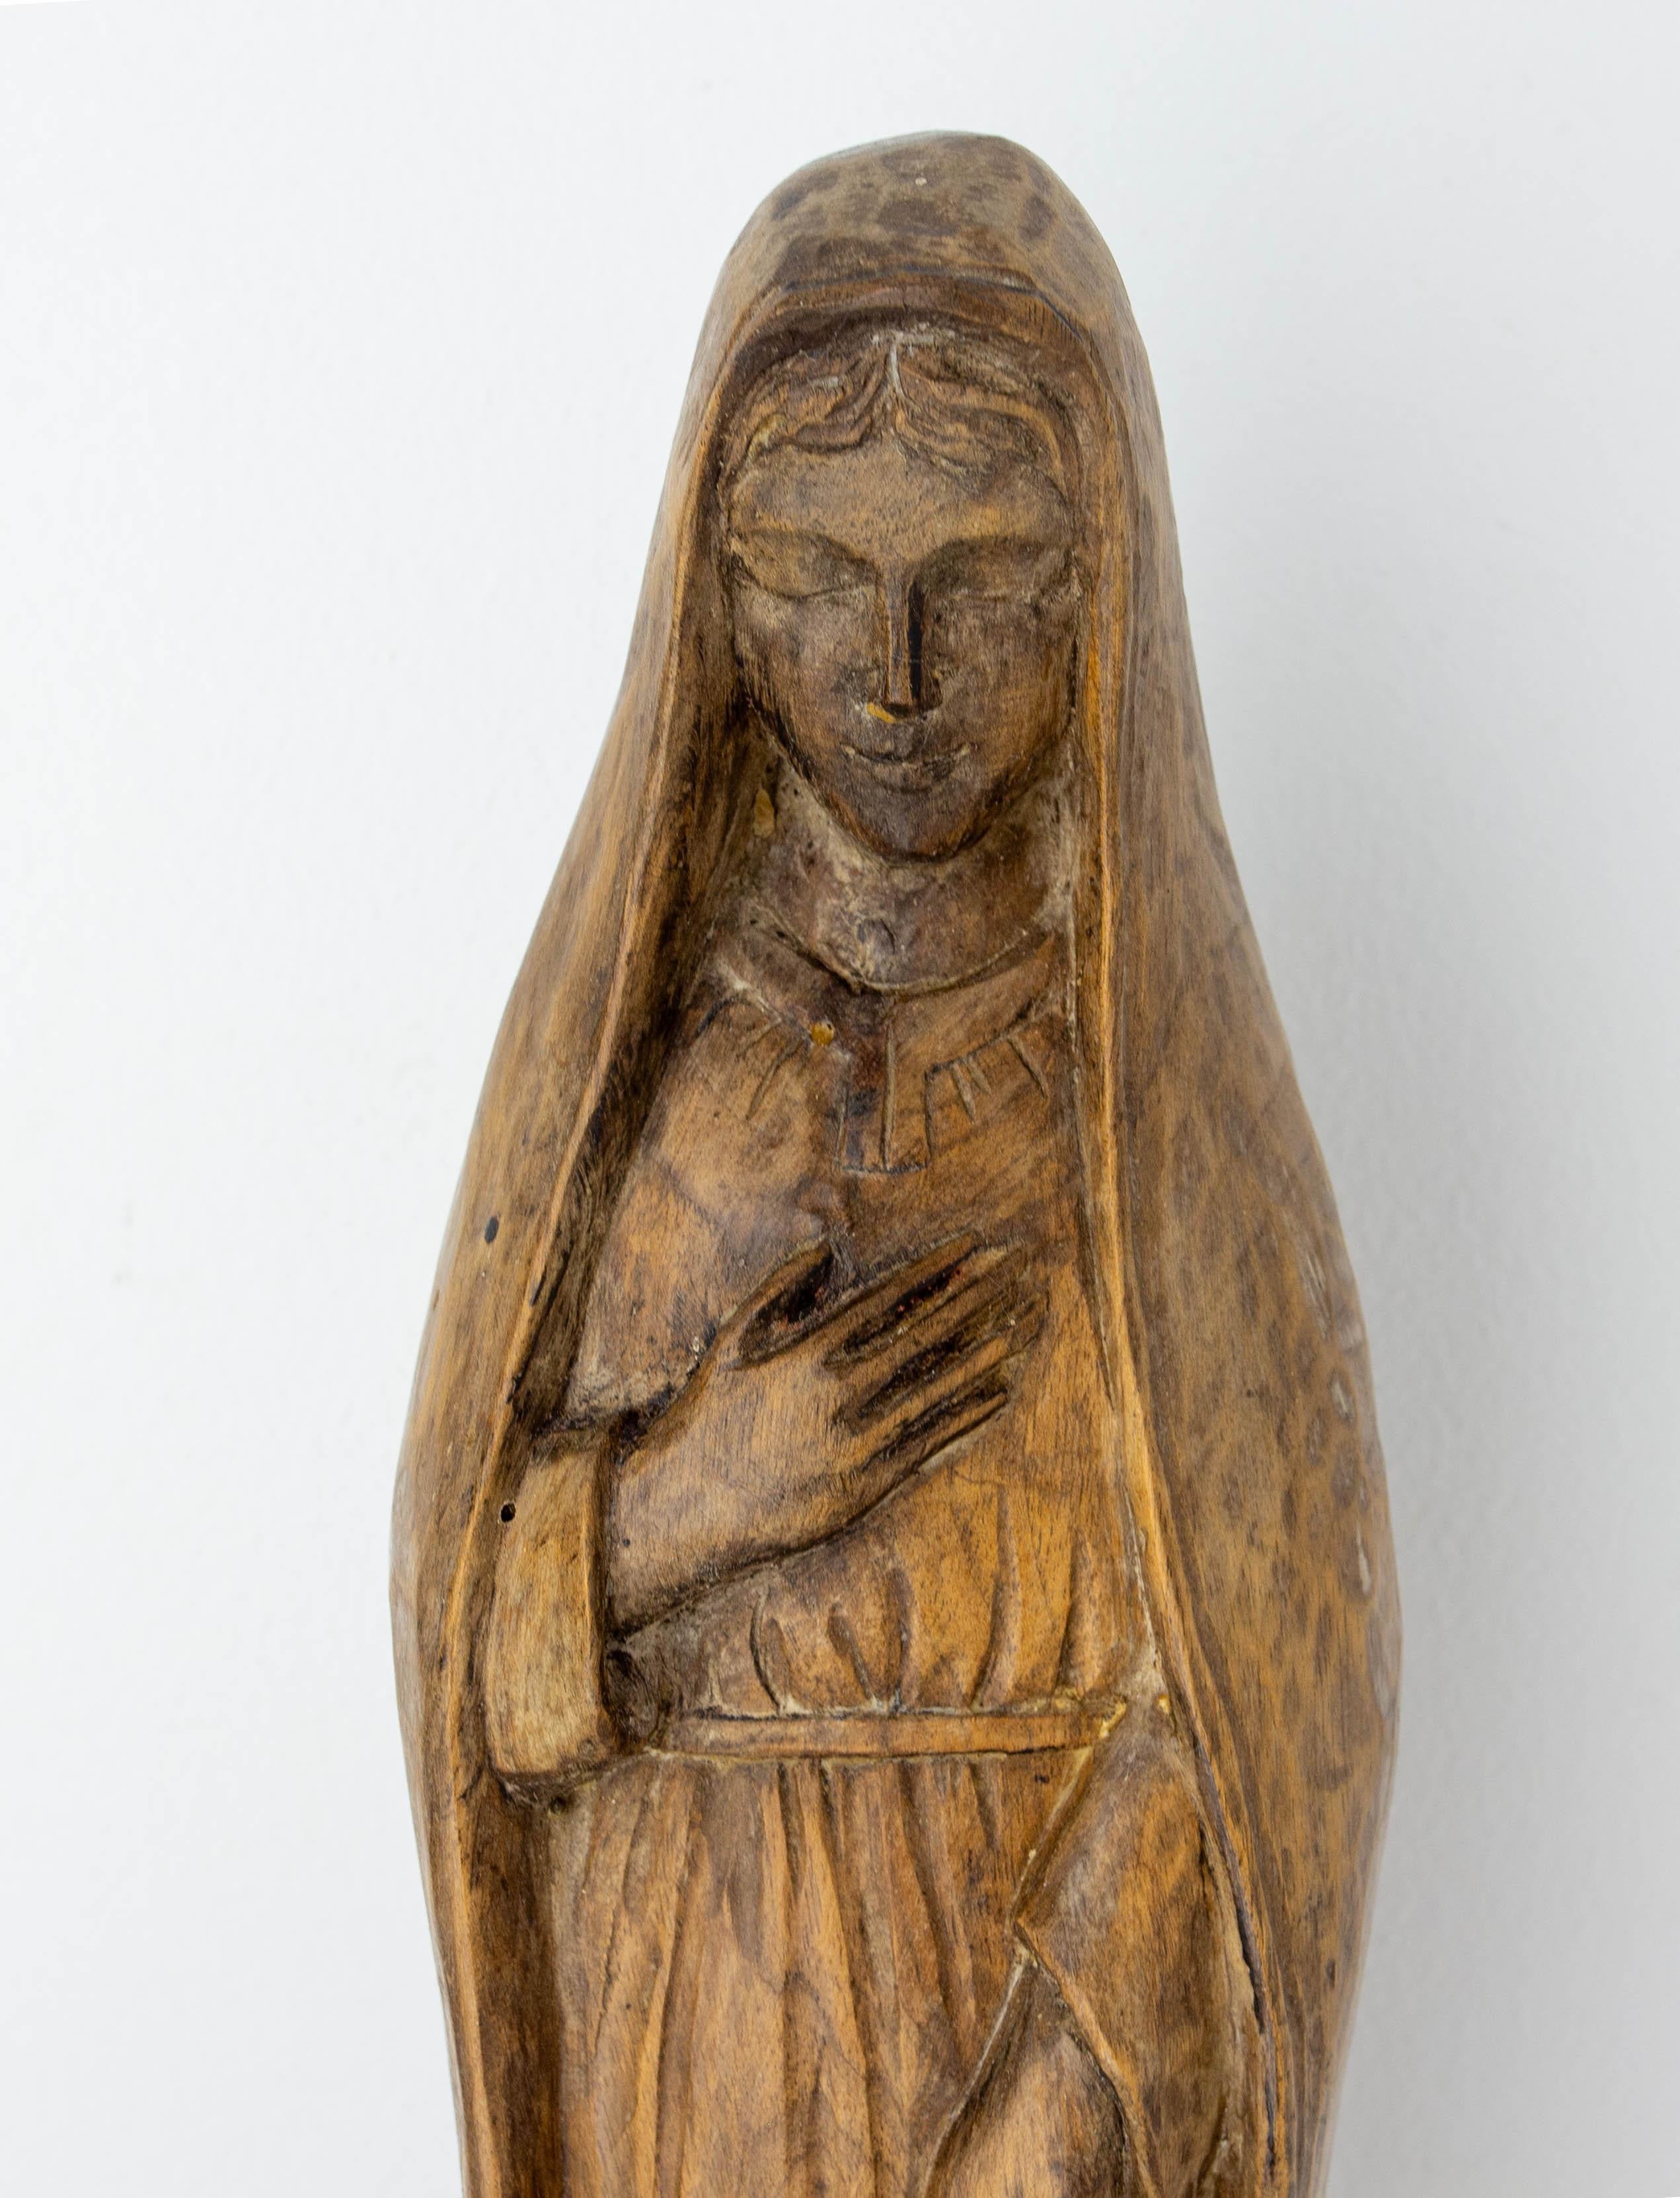 French handmade wood statue in poplar.
Our Lady of Yes refers to the acceptance of the Virgin Mary before the announcement made to her by the Archangel Gabriel. A yes, which for Catholics changed the face of the world. Today many prayers are